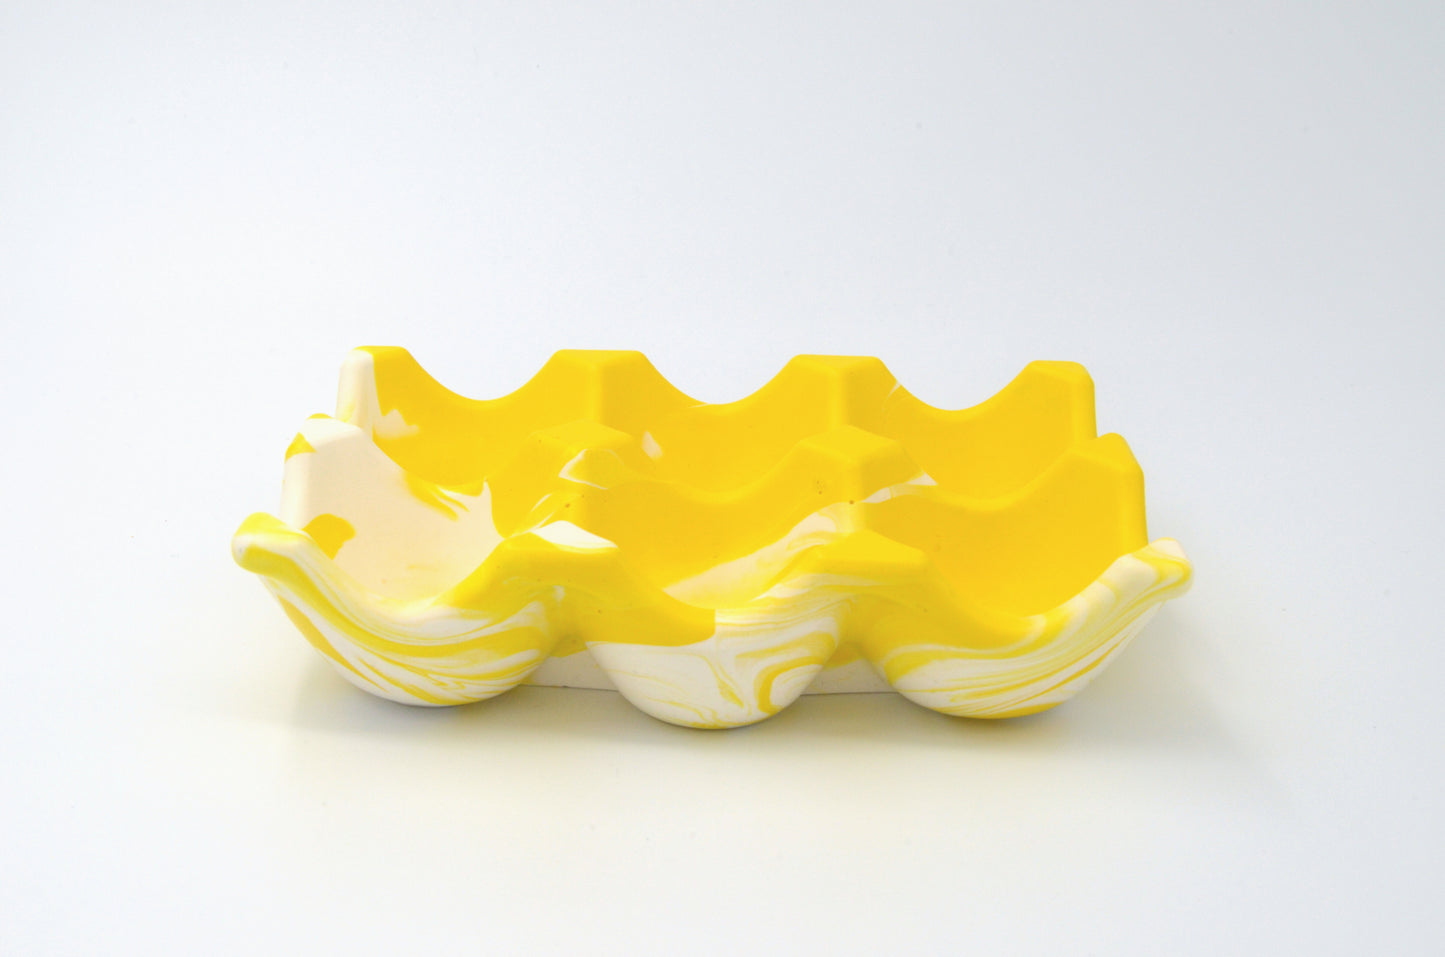 Countertop Egg Holder in Yellow and White Stone